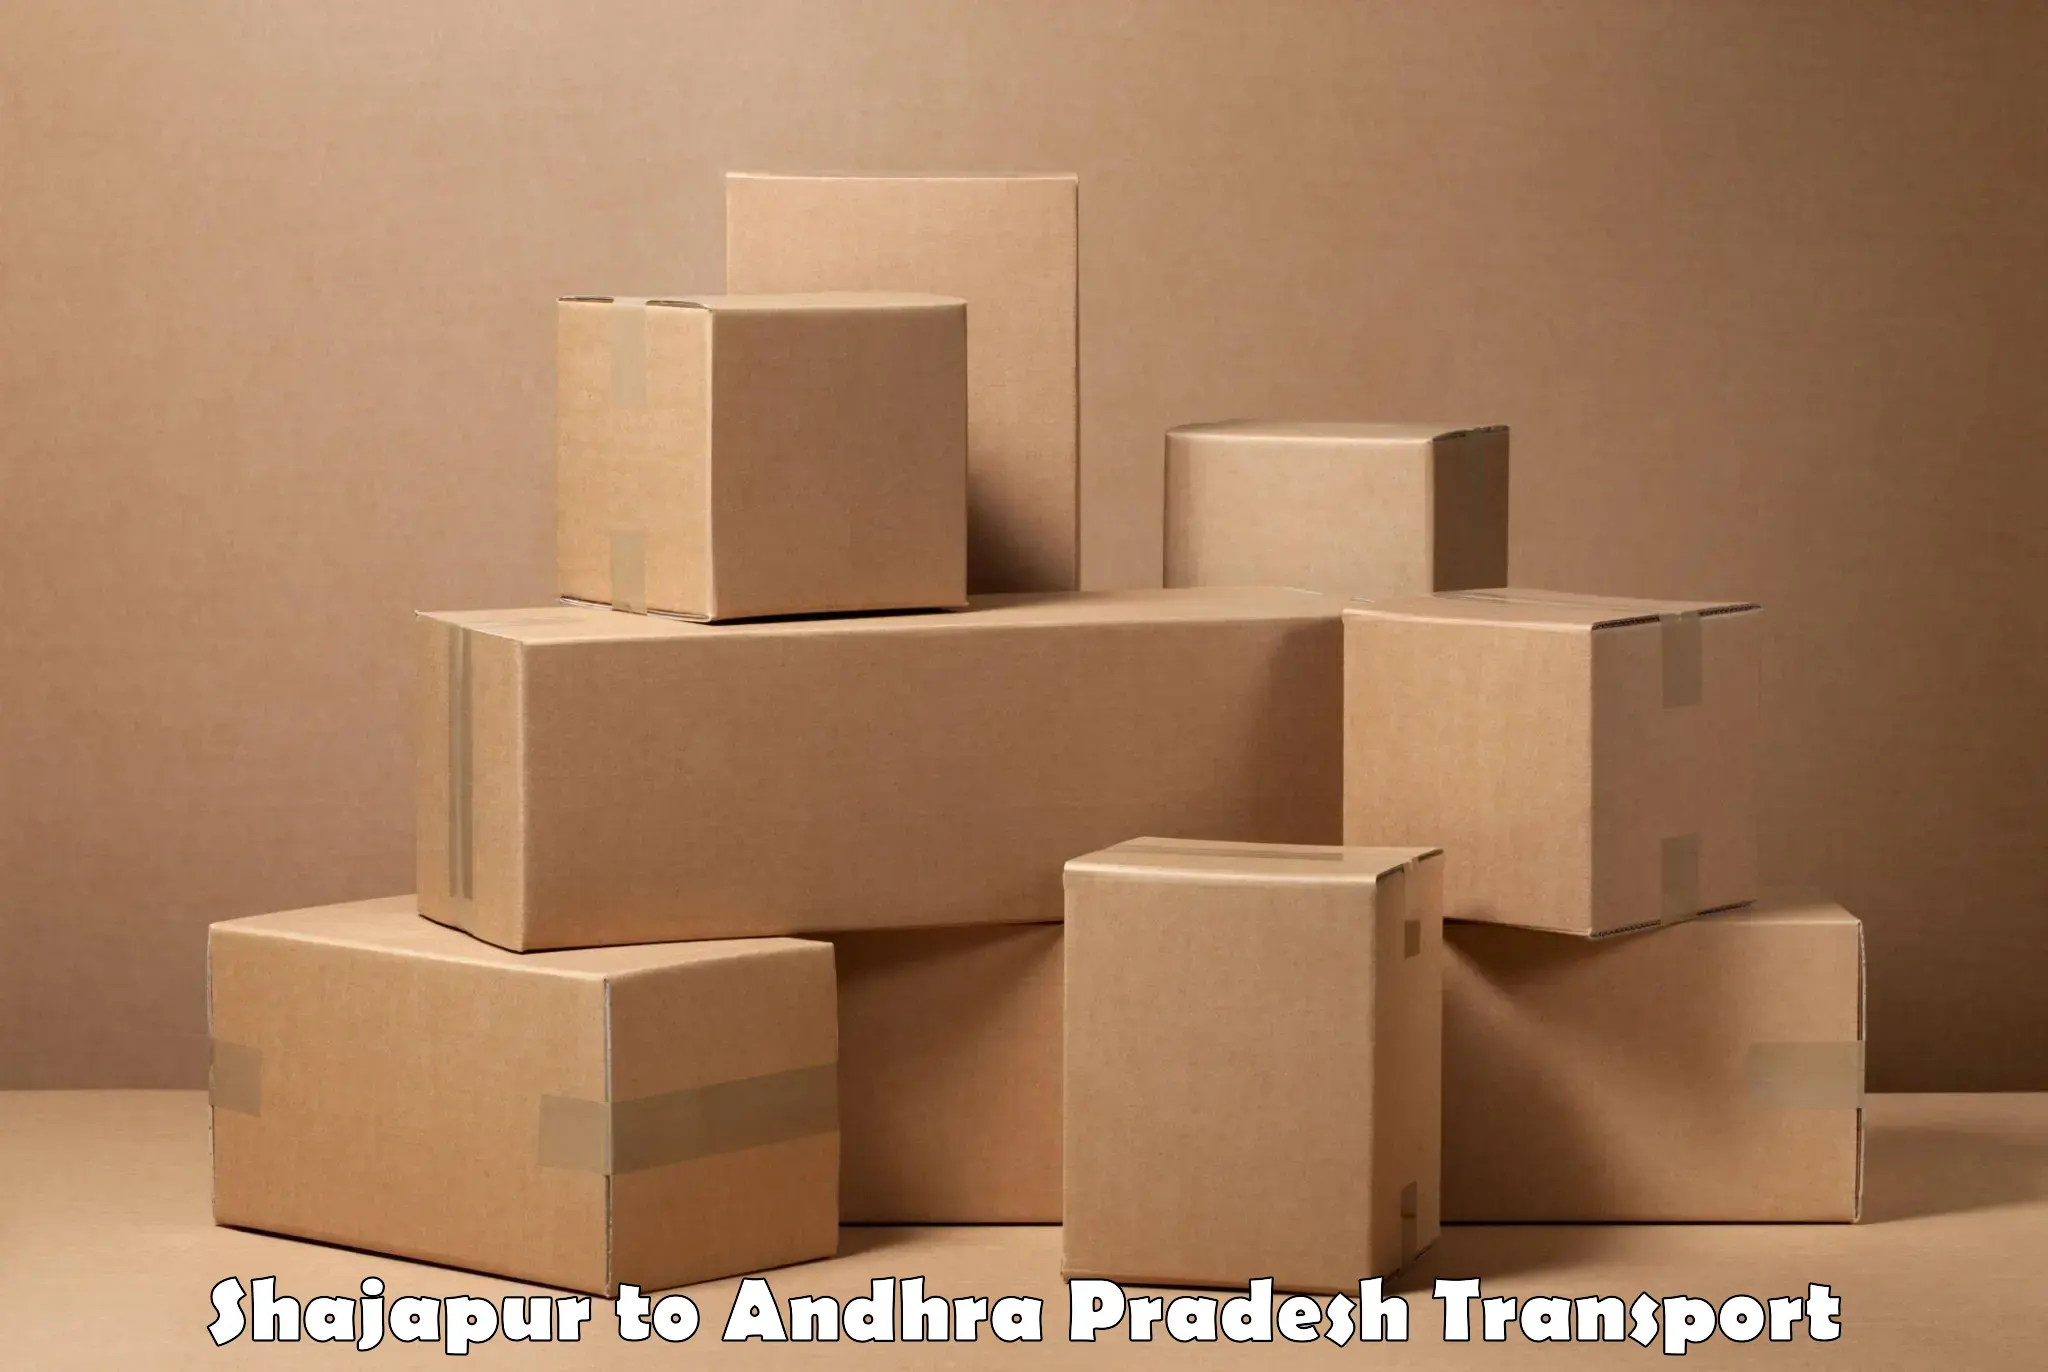 Goods delivery service Shajapur to Gollaprollu